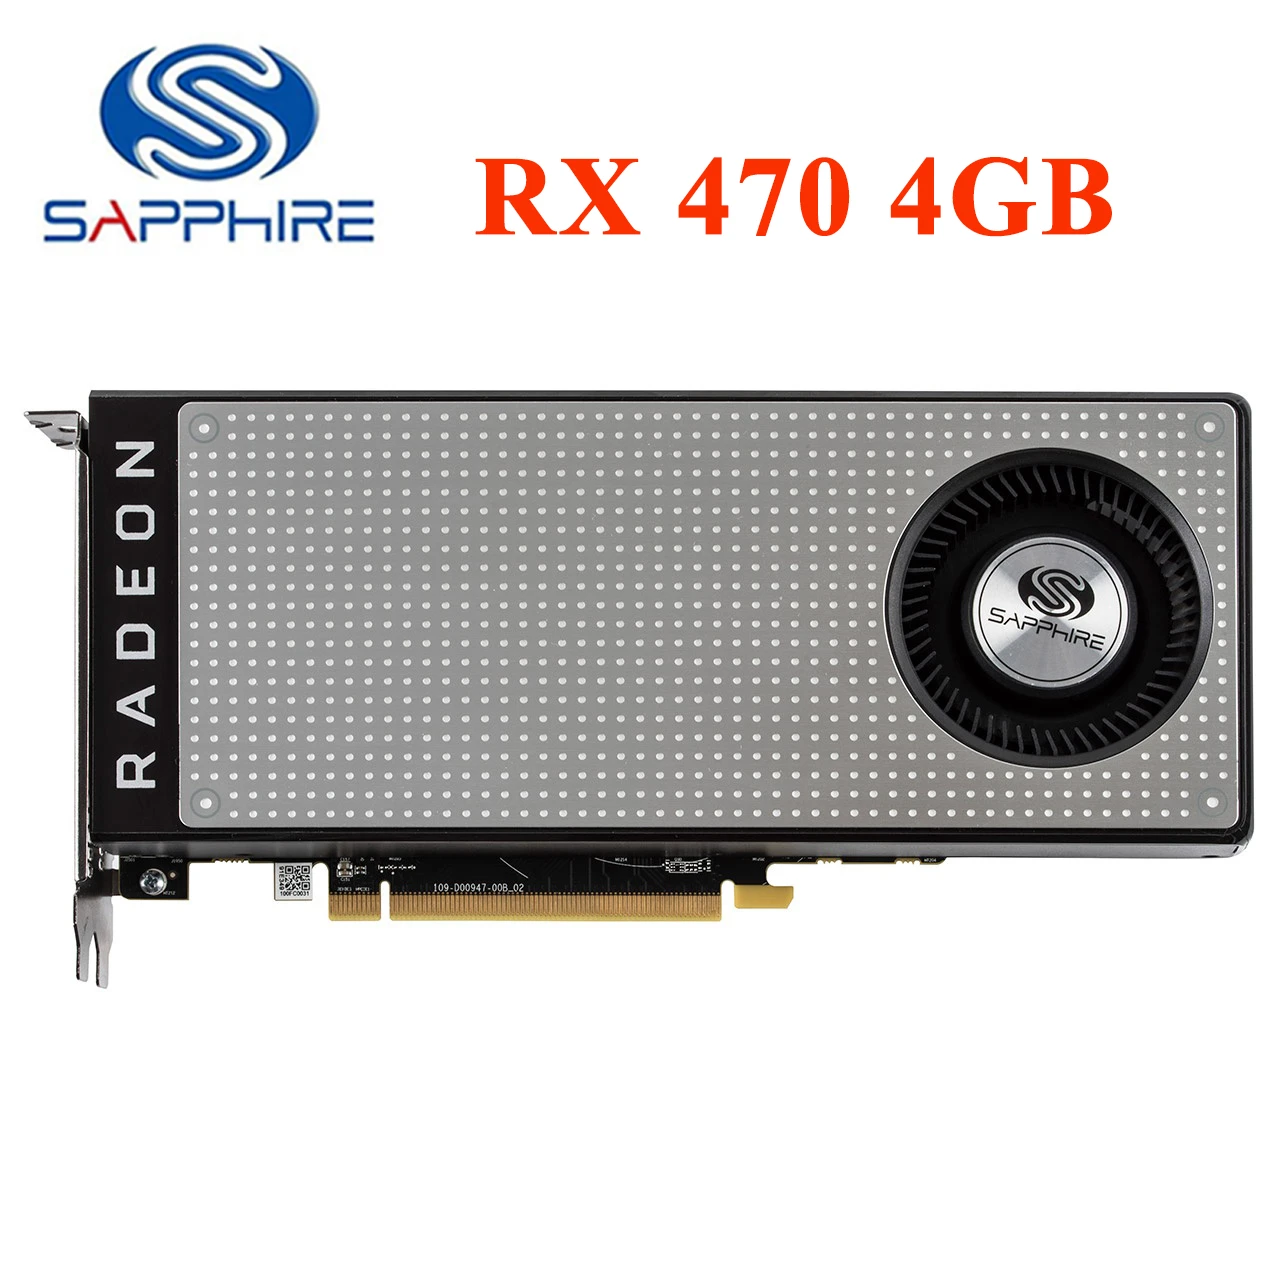 Sapphire Rx 470 4gb Video Card 256bit Gddr5 Graphics Cards For Amd Rx 400  Series Cards Rx470 4g Displayport Hdmi Rx474 Used - Graphics Cards -  AliExpress